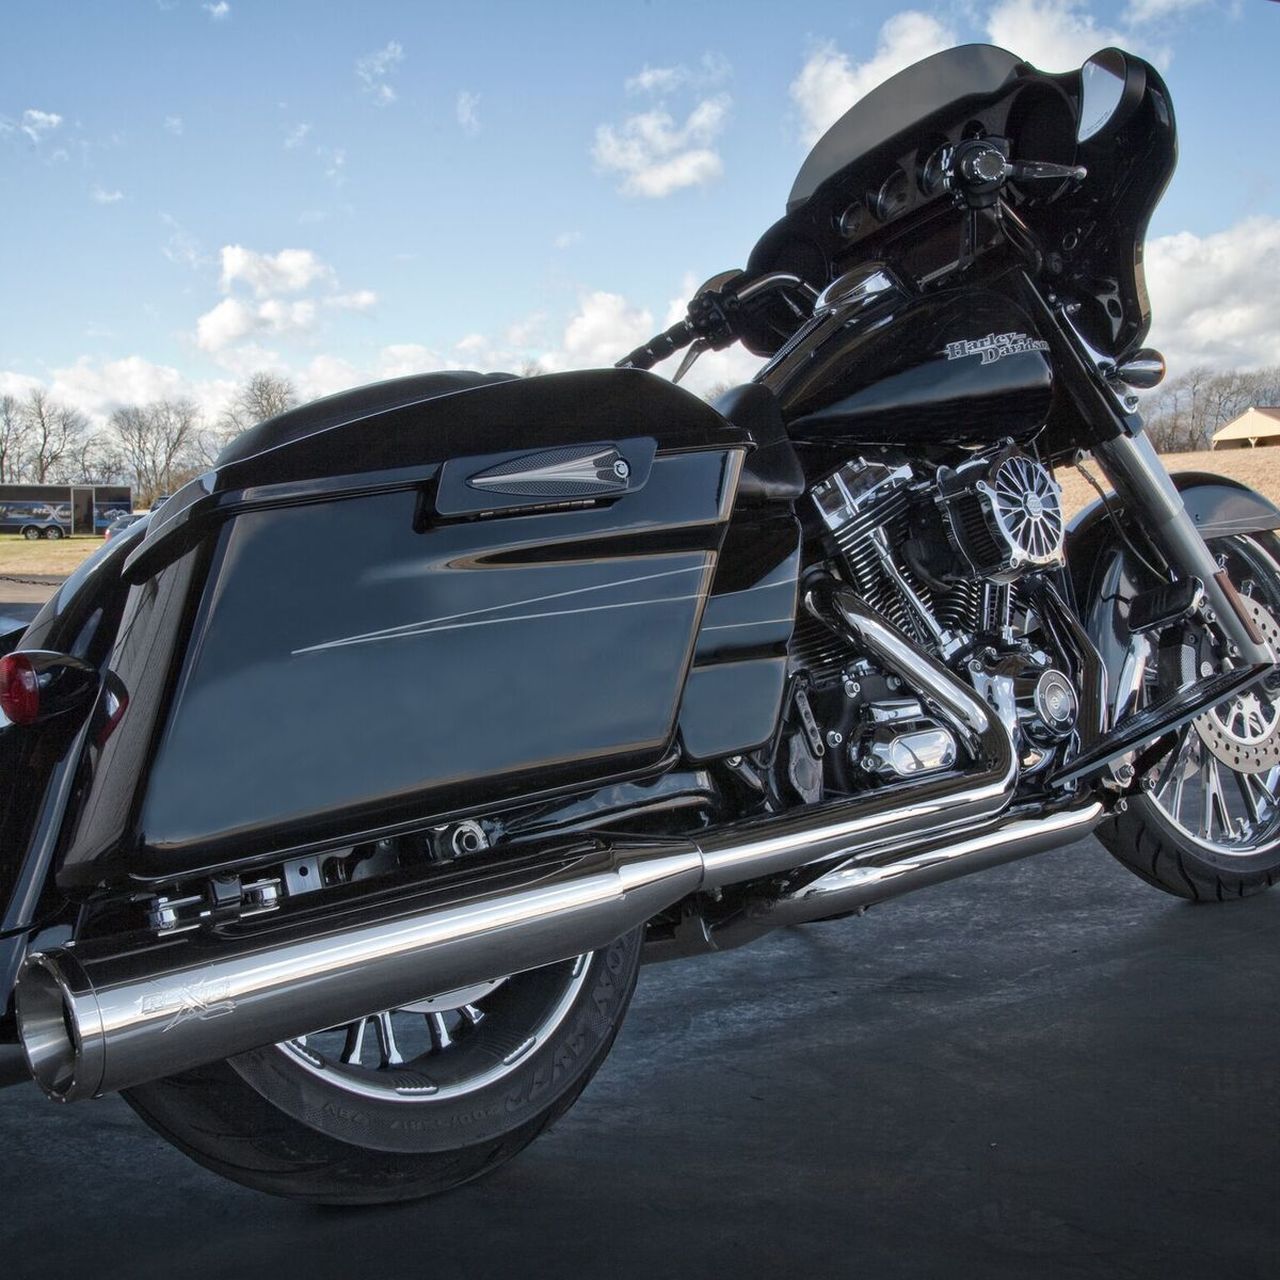 Harley's Screamin Eagle High Flow Exhaust System